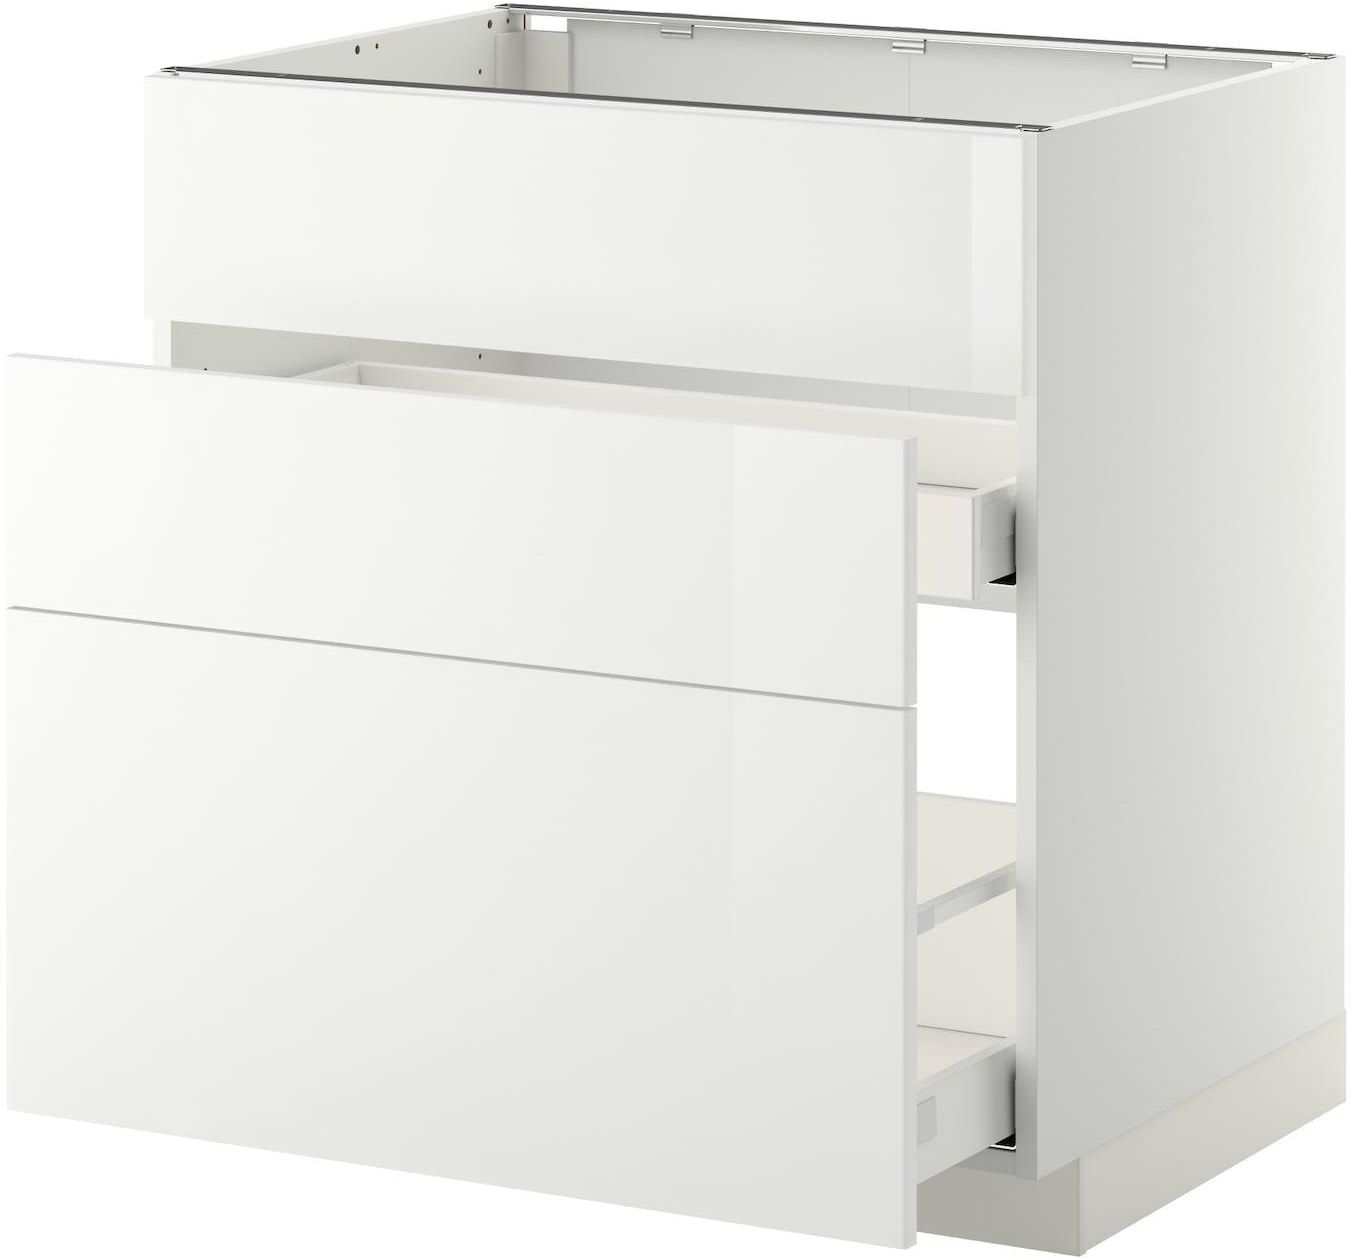 METOD / MAXIMERA Base cab f sink+3 fronts/2 drawers - white/Ringhult white 80x60 cm